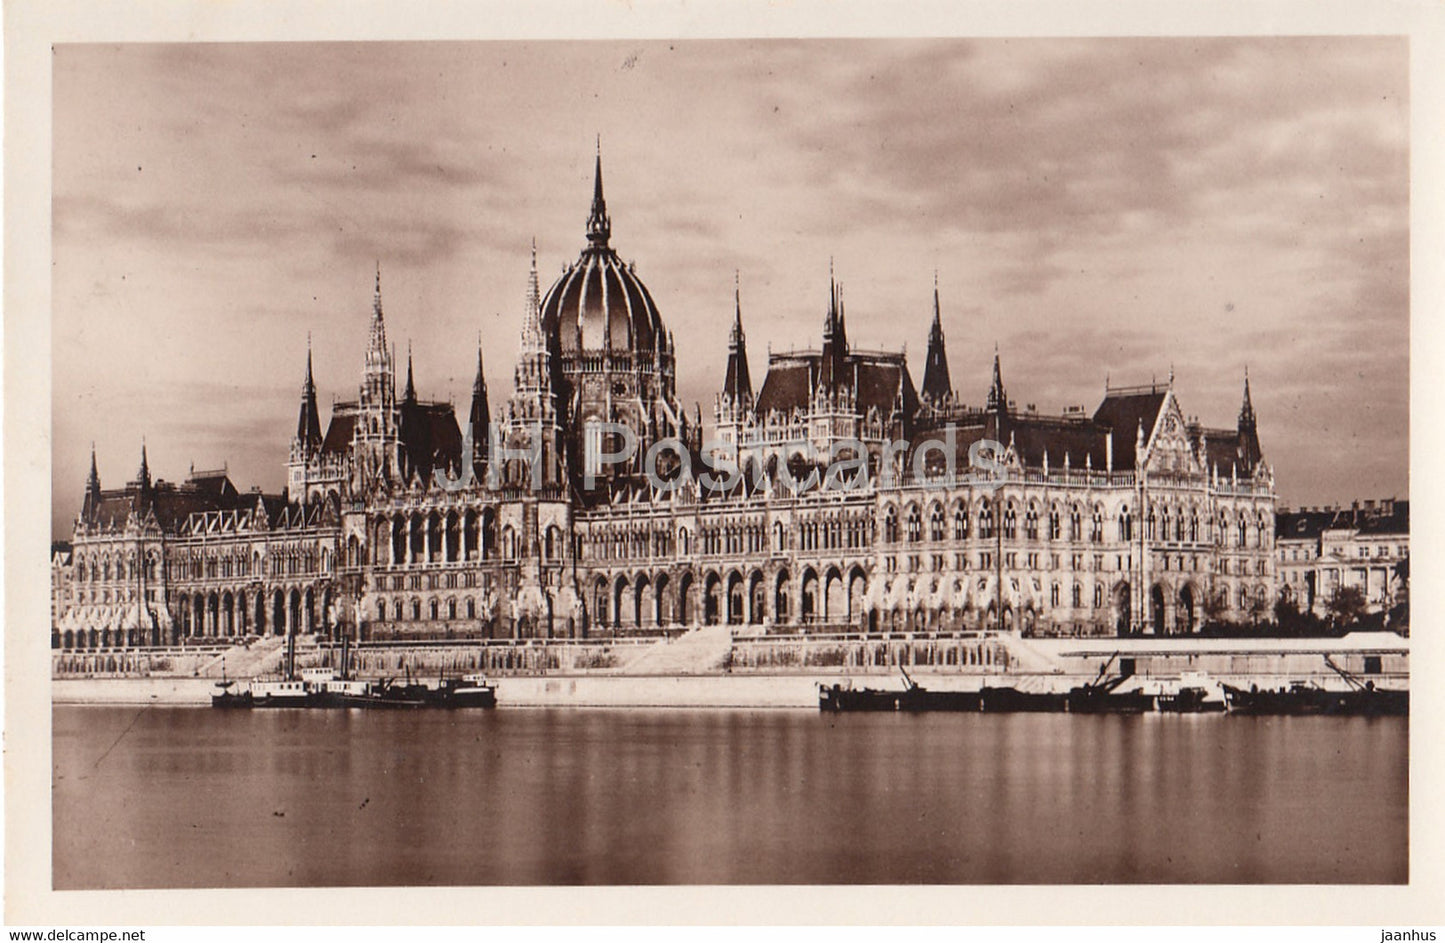 Budapest - Orszaghaz - Parlament - old postcard - Hungary - unused - JH Postcards